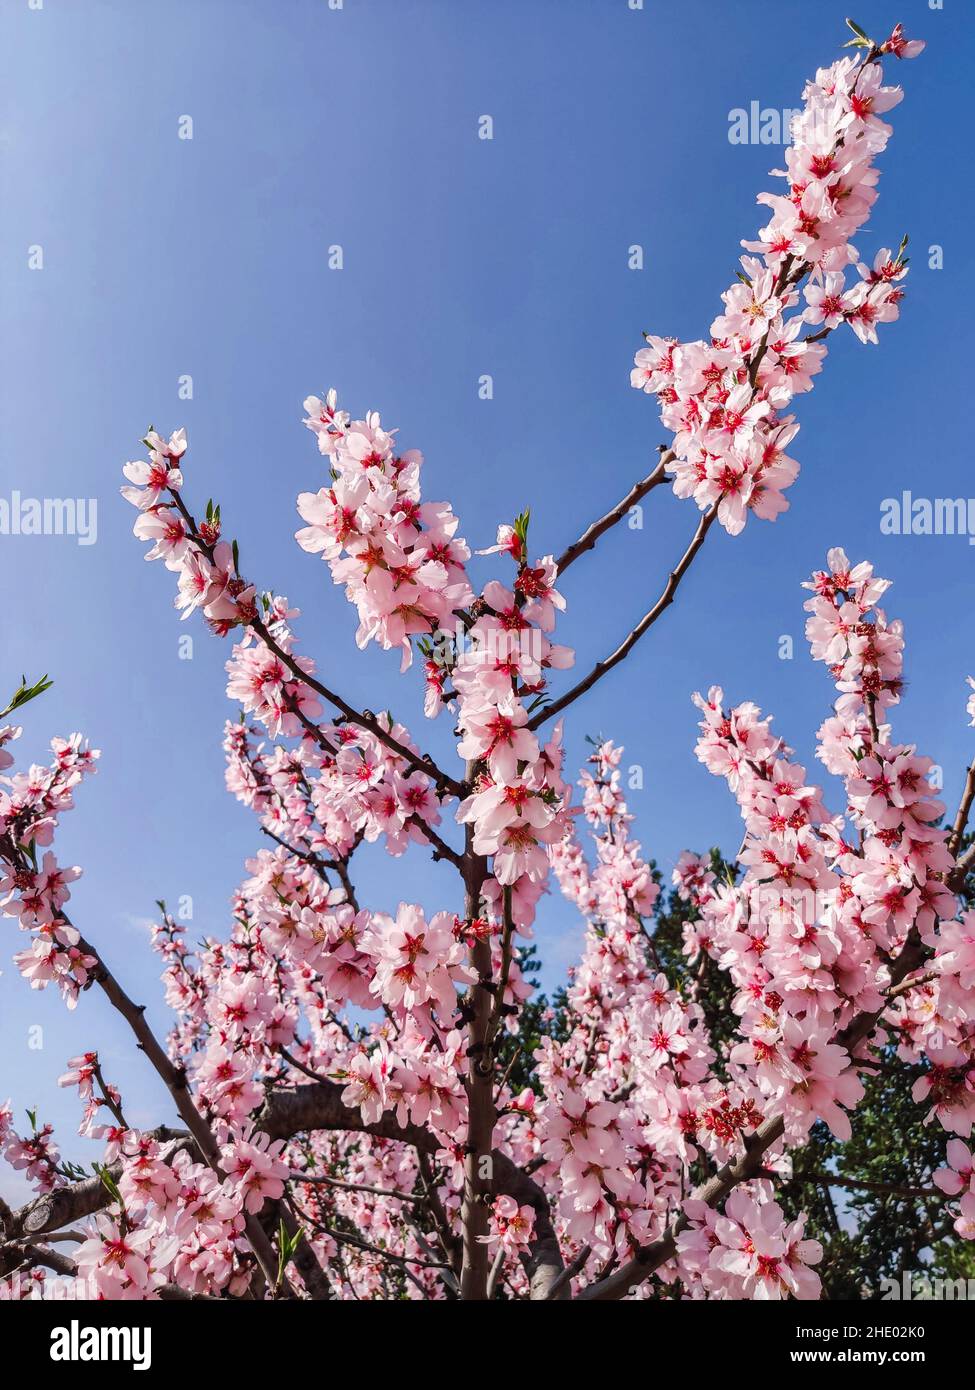 Beautiful almond branch blooming in February. Pink almond blossoms over blue sky Stock Photo